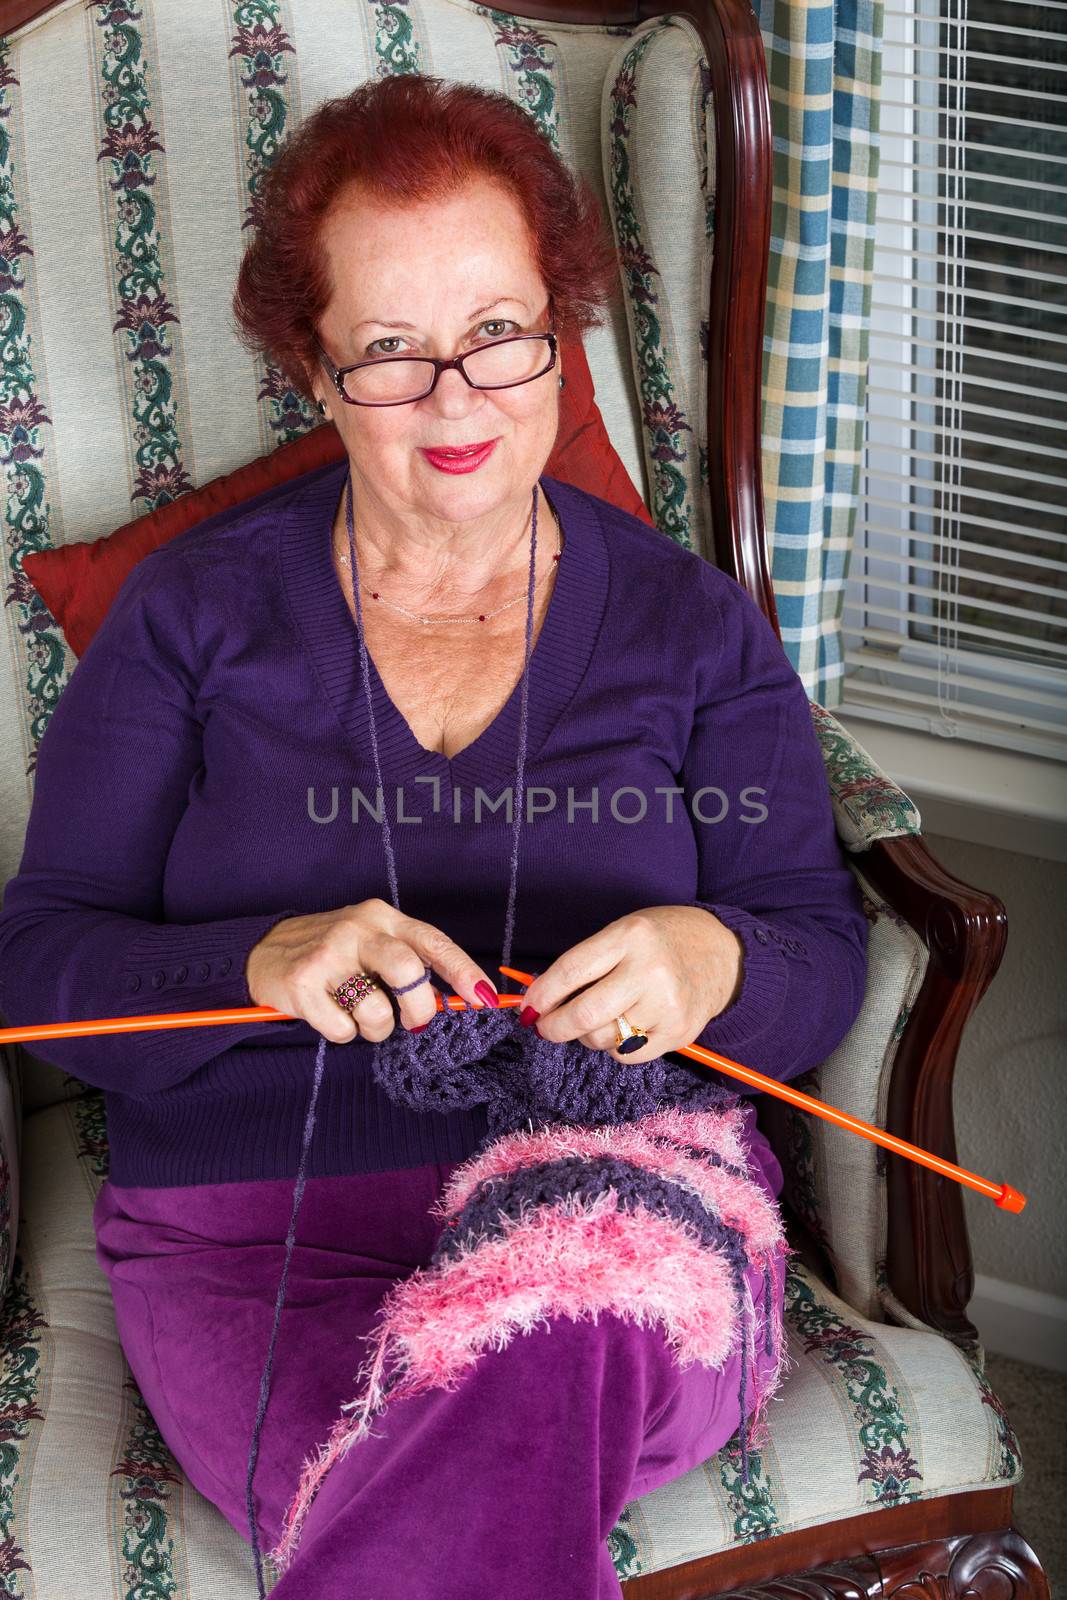 Red haired senior lady looking at you while knitting her purple scarf, she is wearing purple clothing perhaps purple is her favorite color